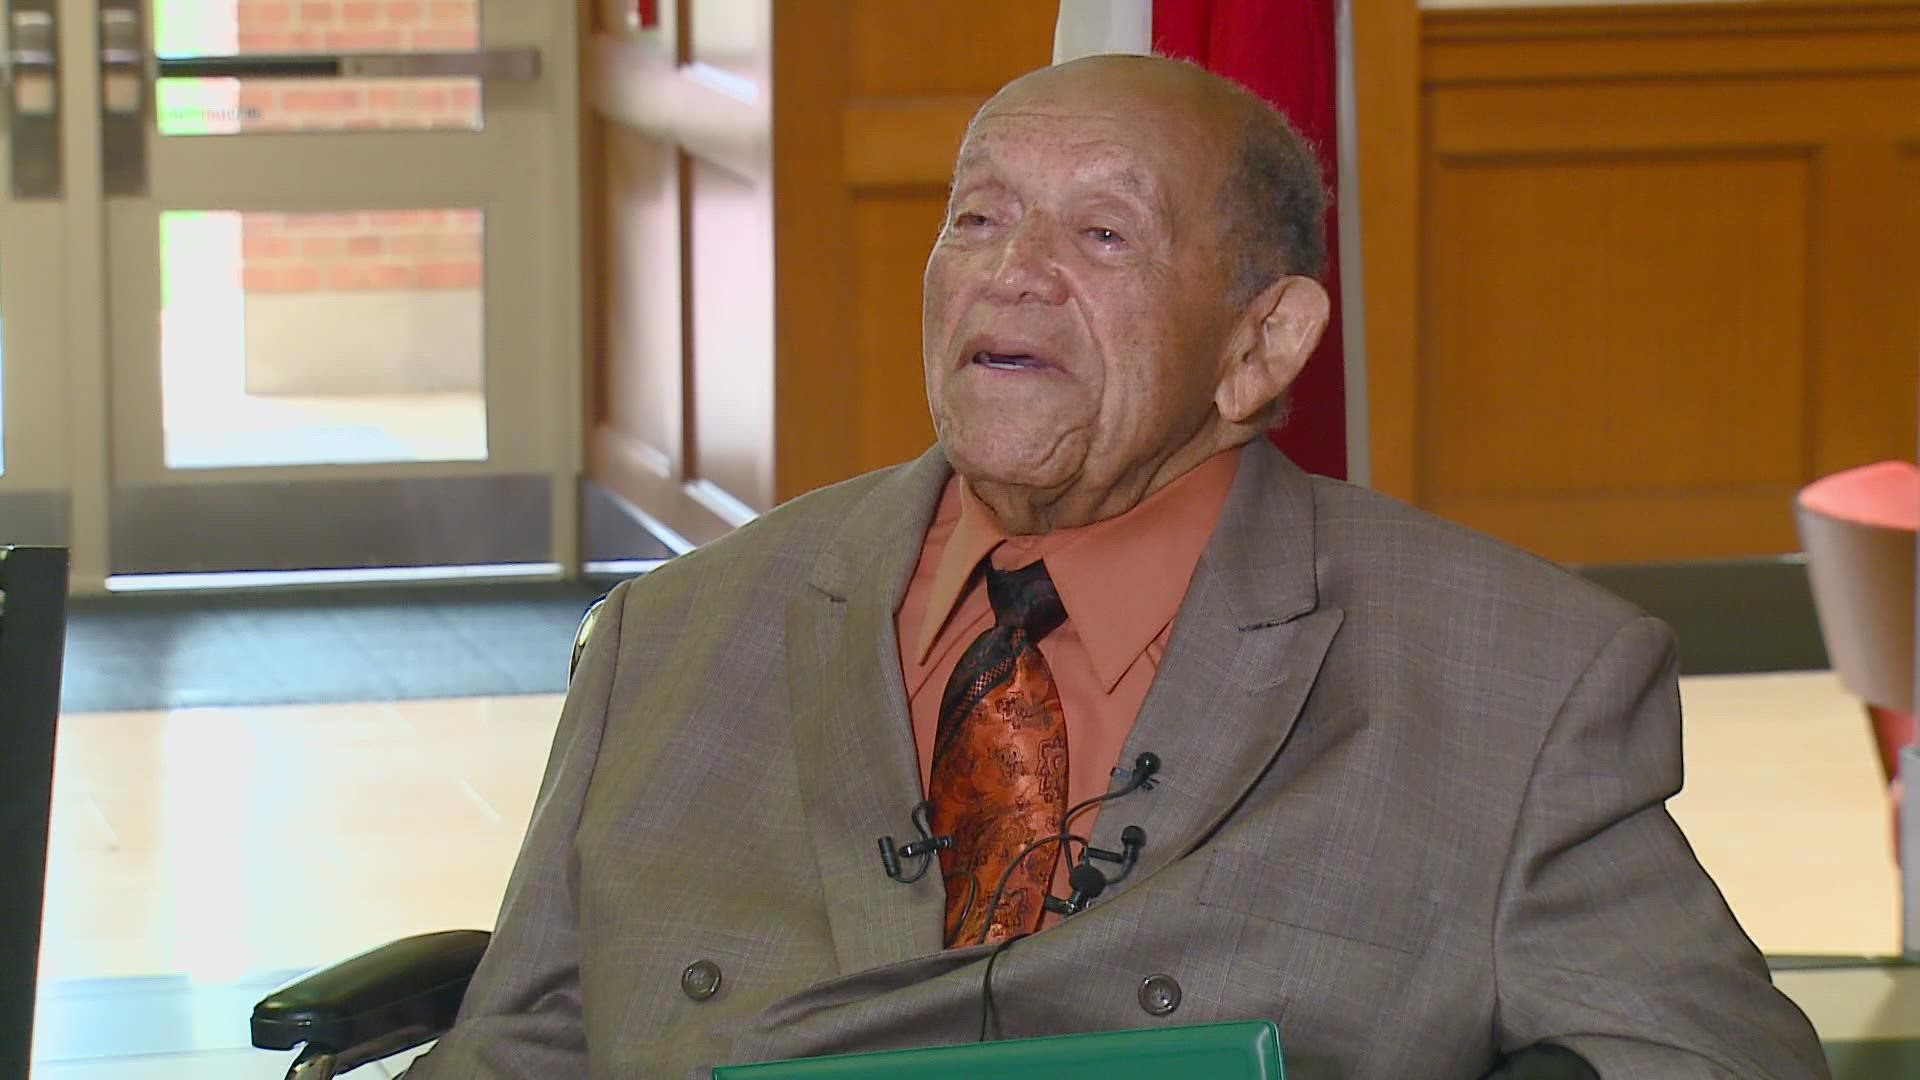 Wake Forest University to give honors to a Korean War veteran who’s been waiting decades to be recognized.